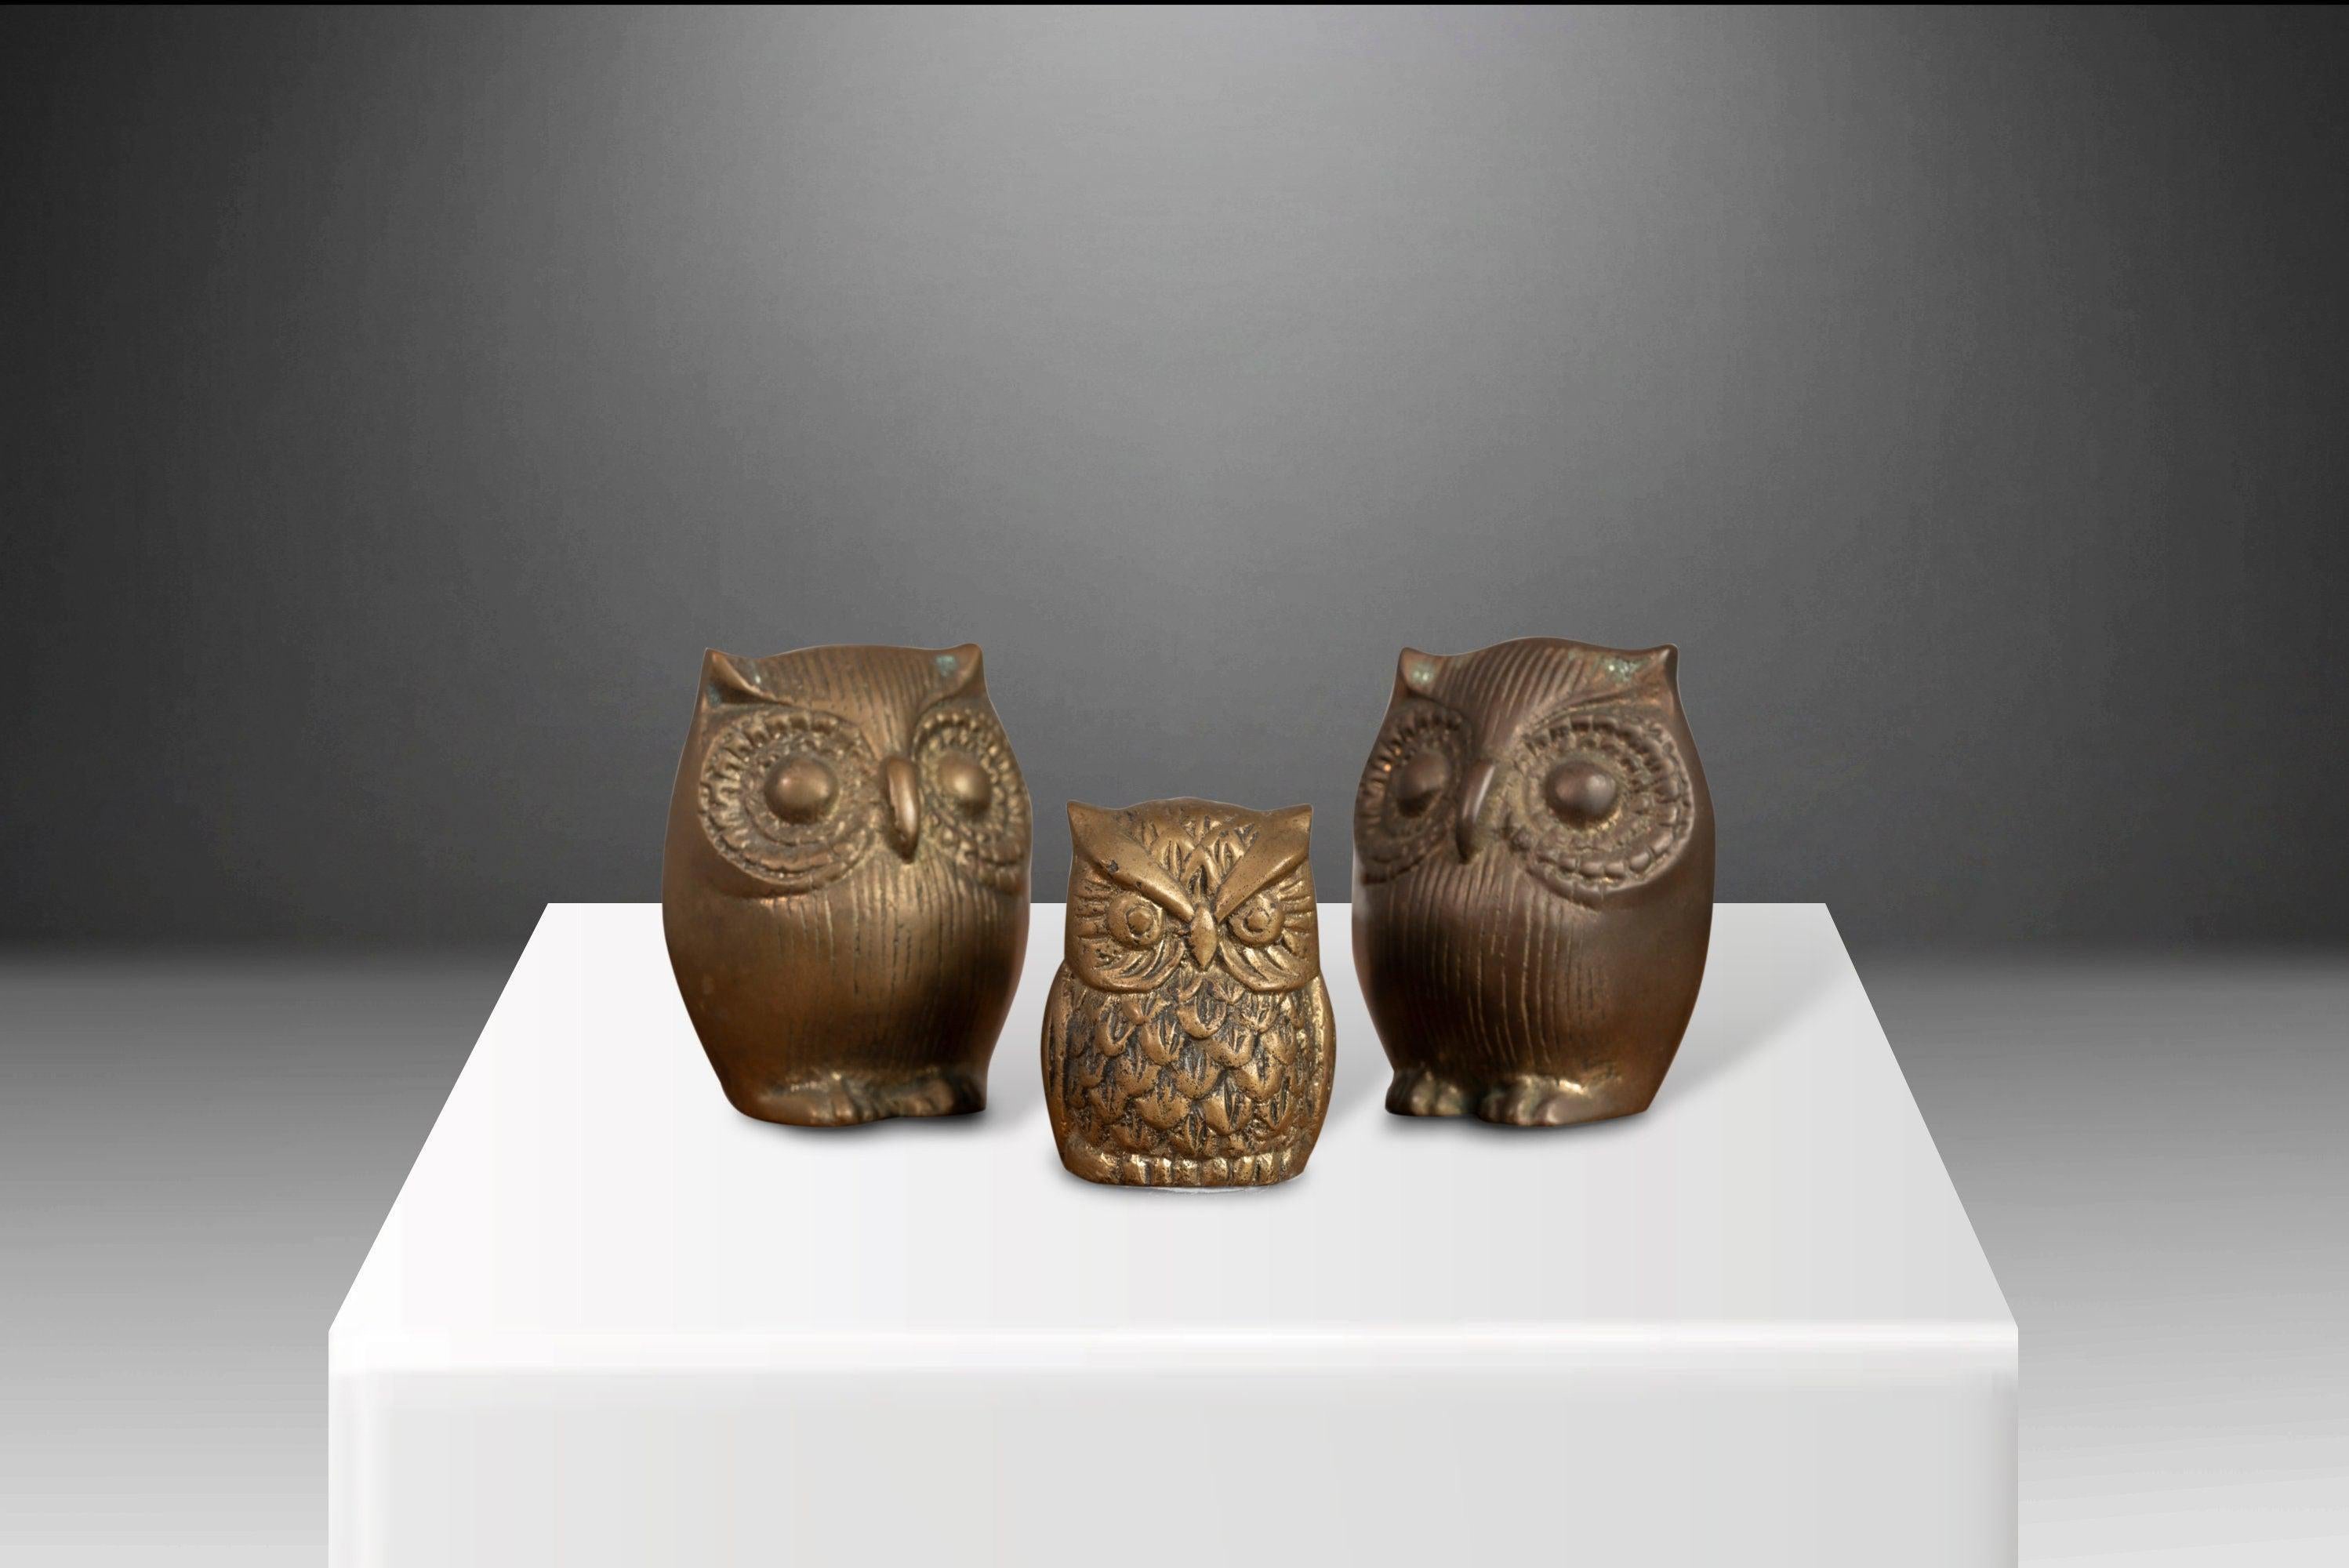 Adorable and functional this set of brass owl paperweights is the perfect accent for your office or home collection.
